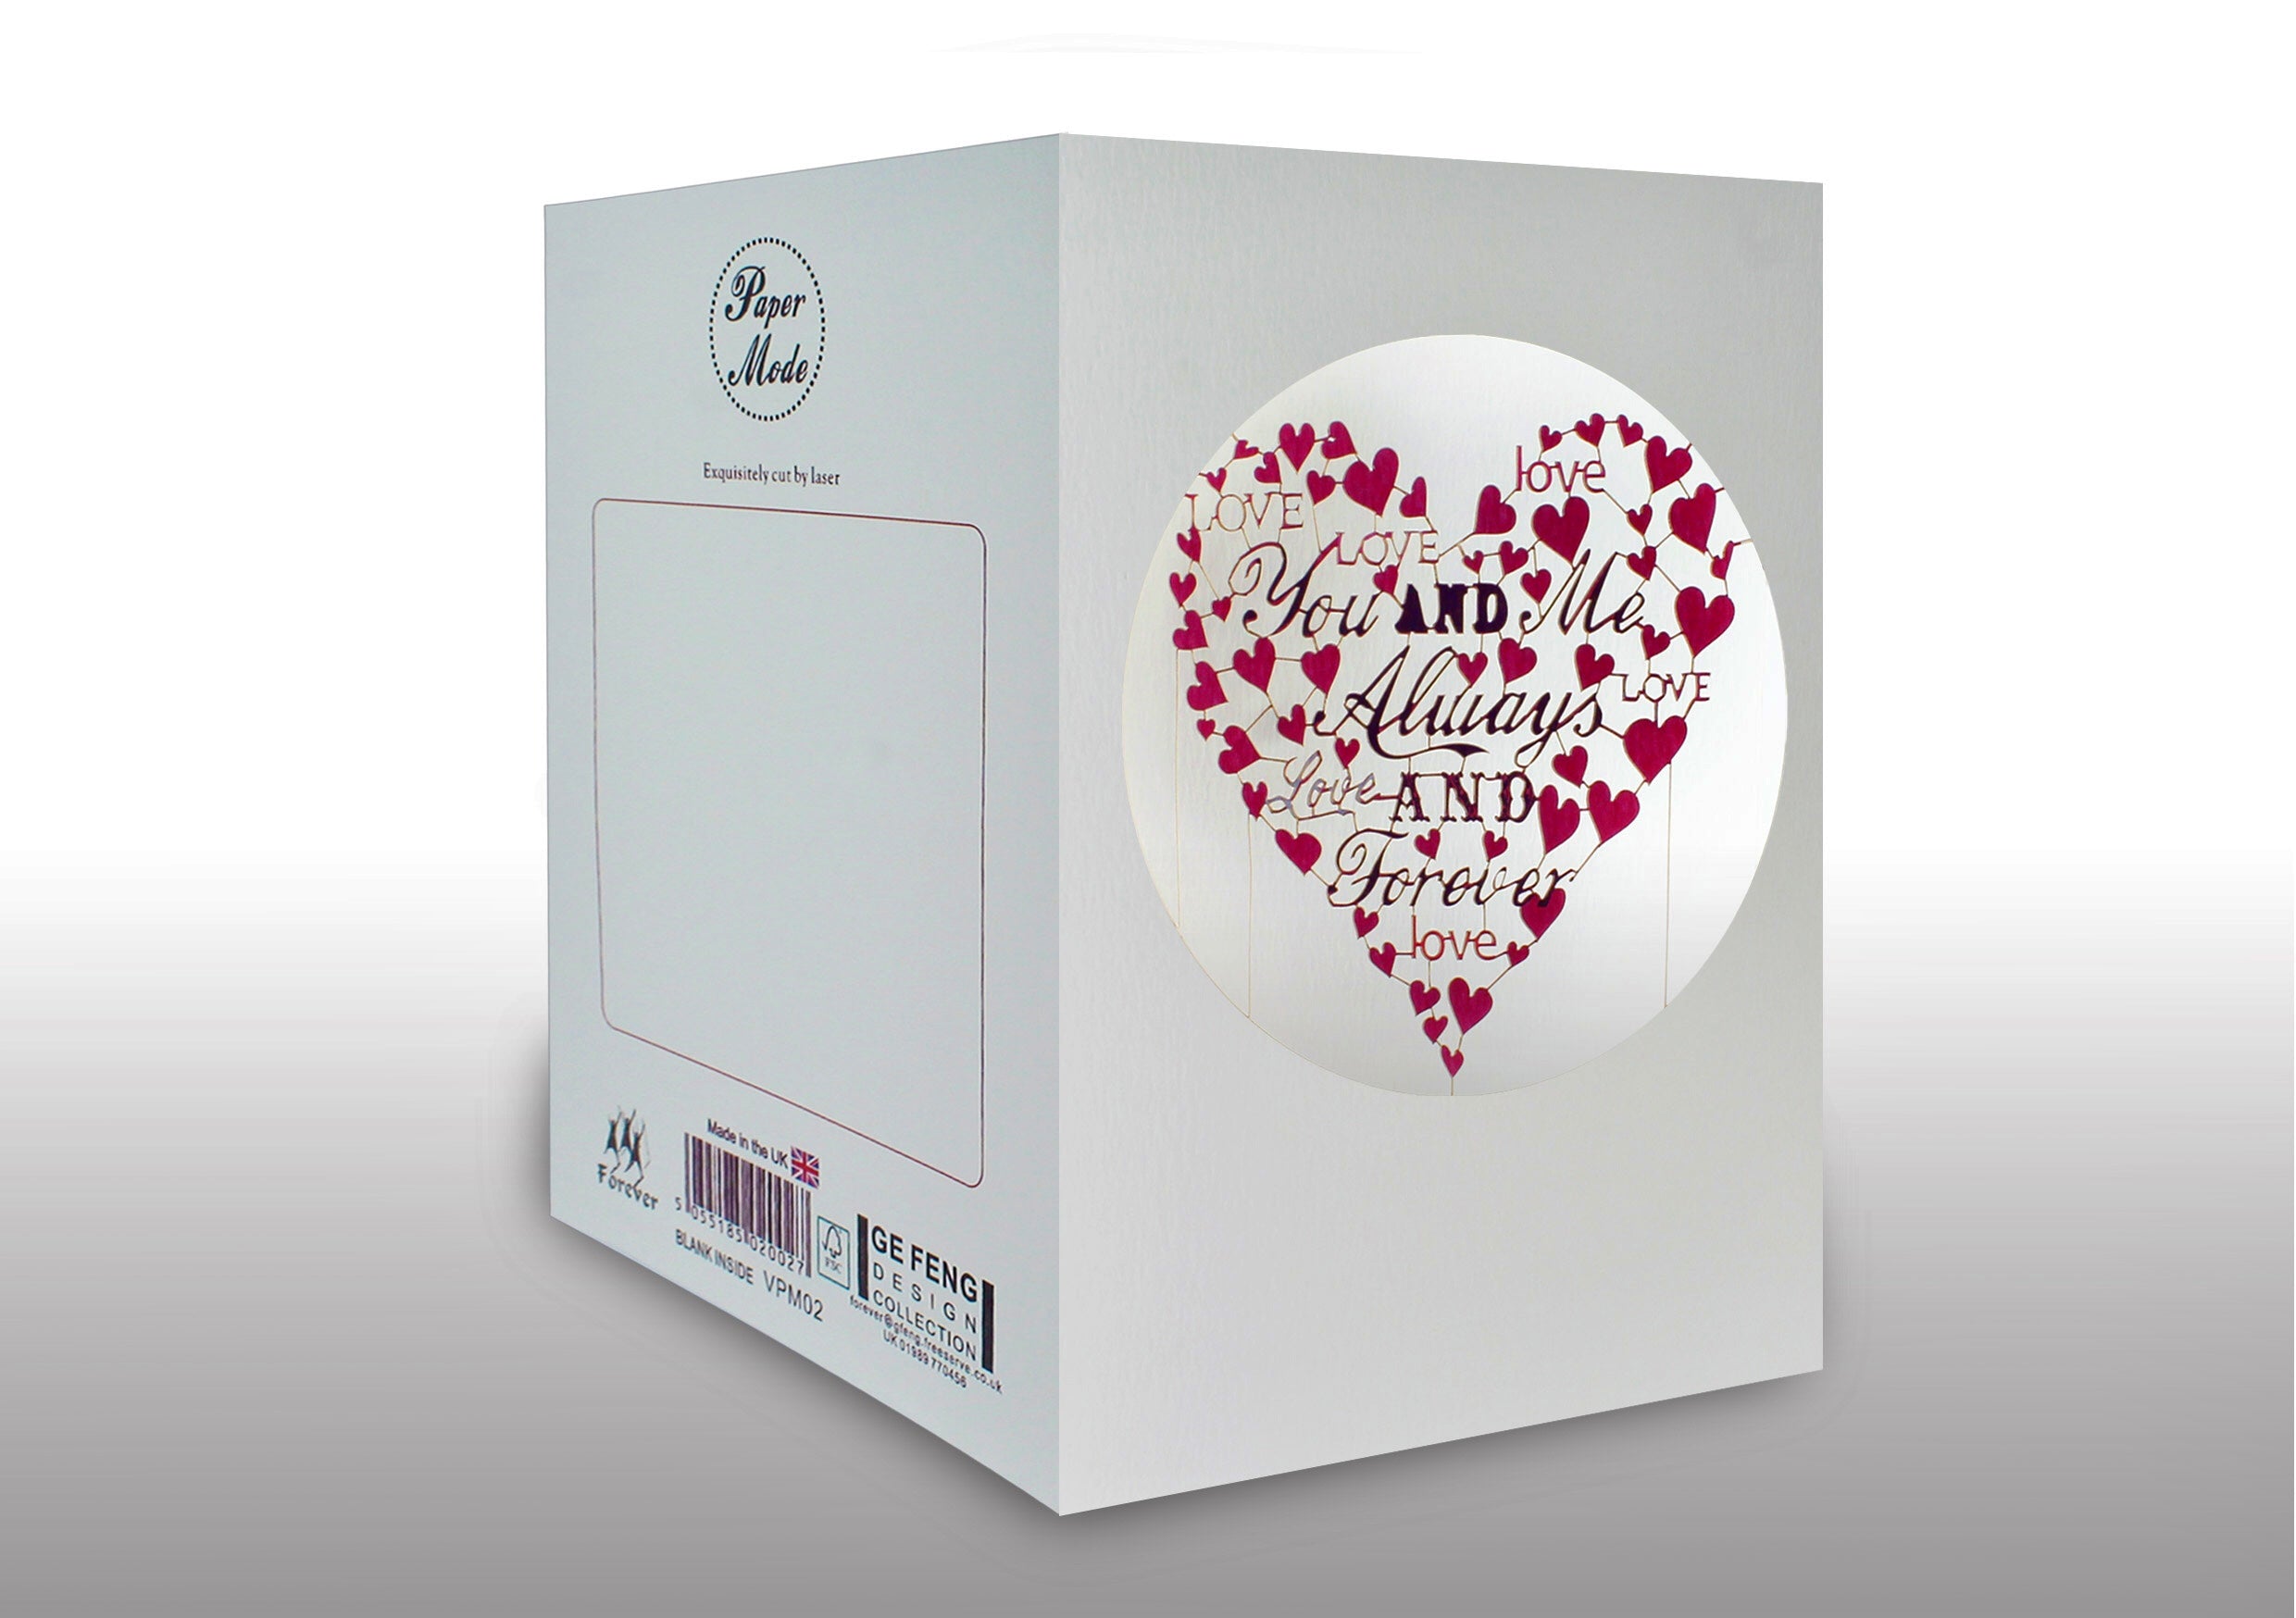 Valentines You & Me Forever 3D Cut Out Wedding Anniversary Birthday Greeting Card